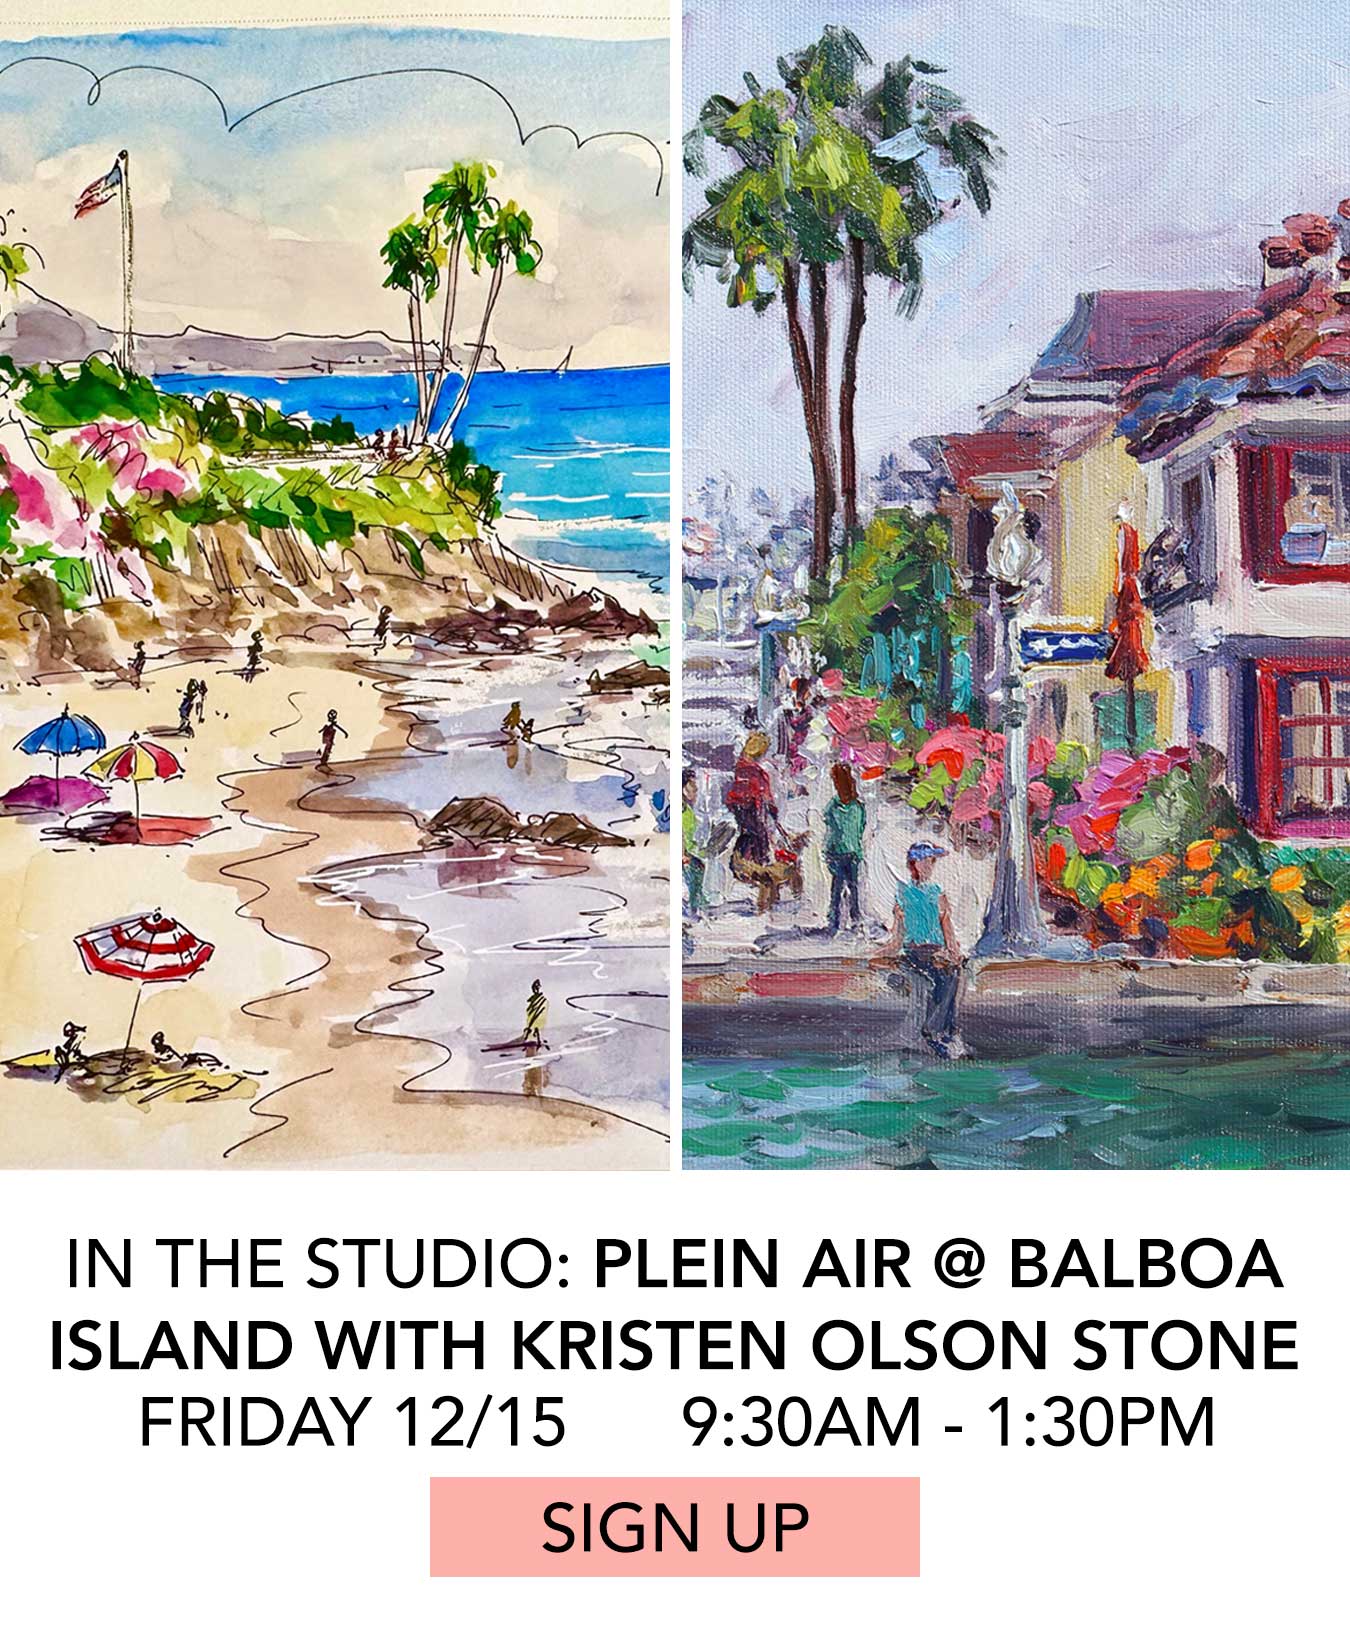 In the Studio: Plein Air at Balboa Island with Kristen Olson Stone. Friday 12/15 from 9:30am to 1:30pm. Click to Sign Up.